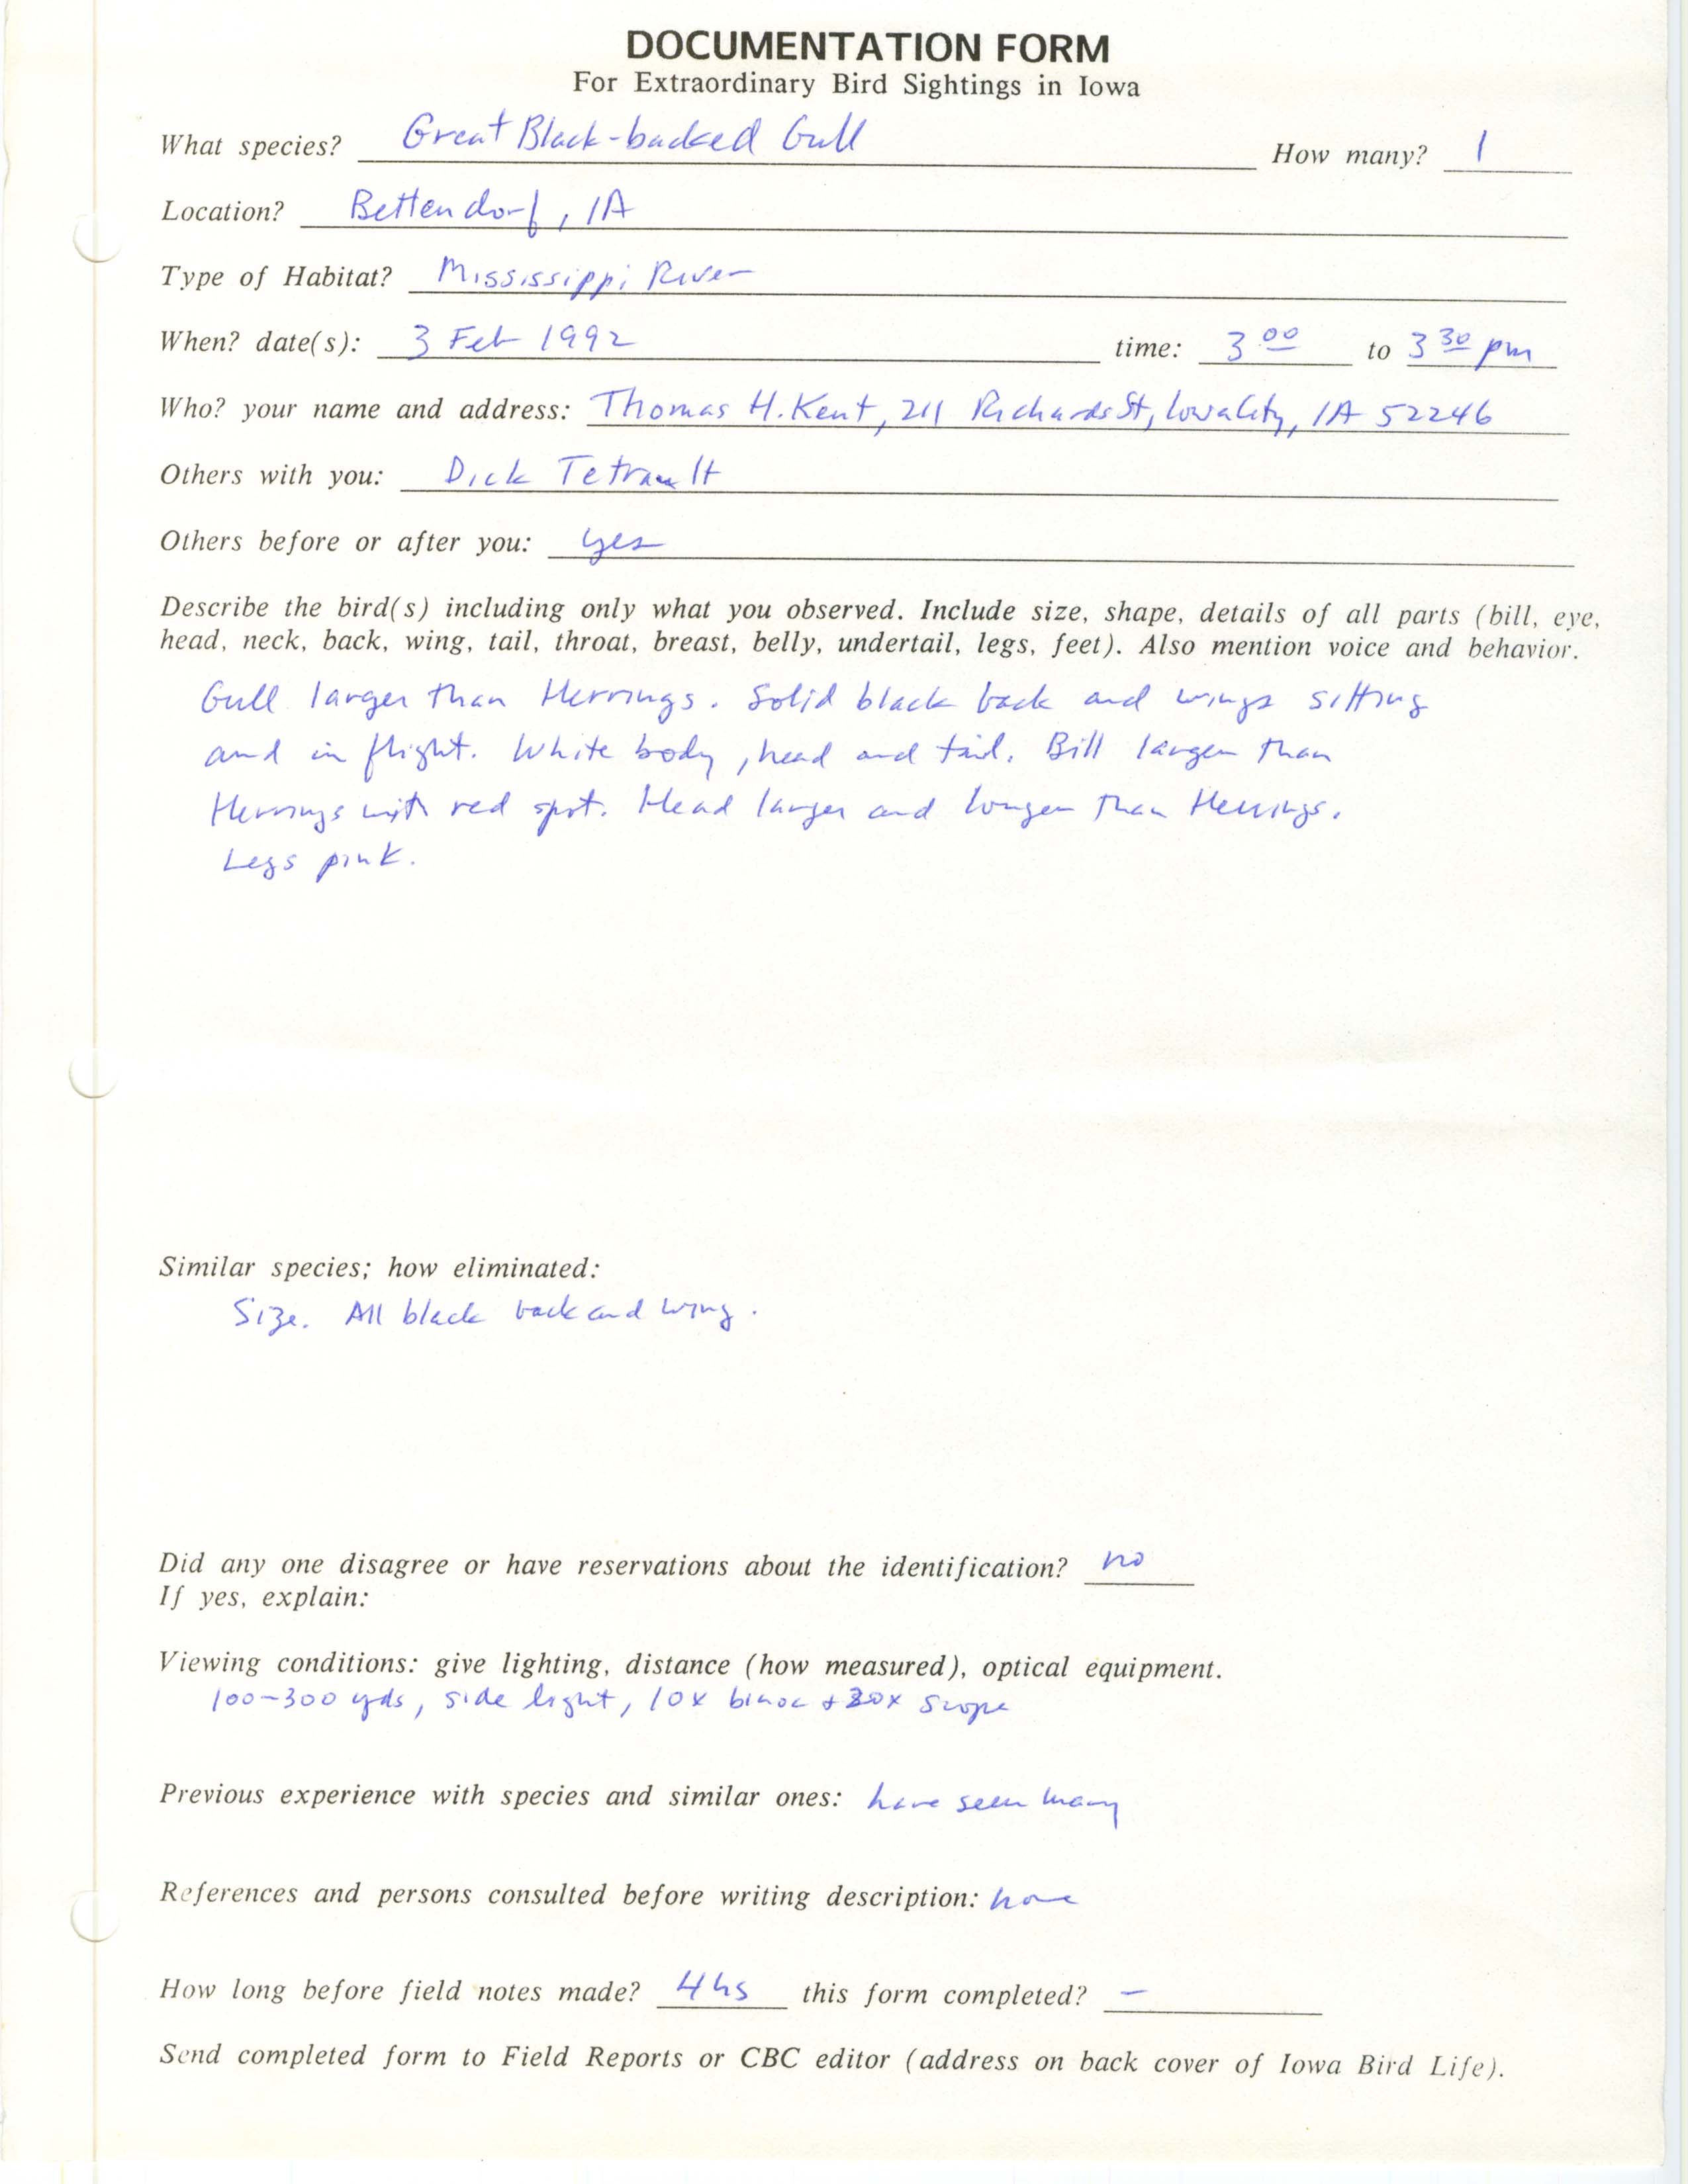 Rare bird documentation form for Great Black-backed Gull at Bettendorf, 1992